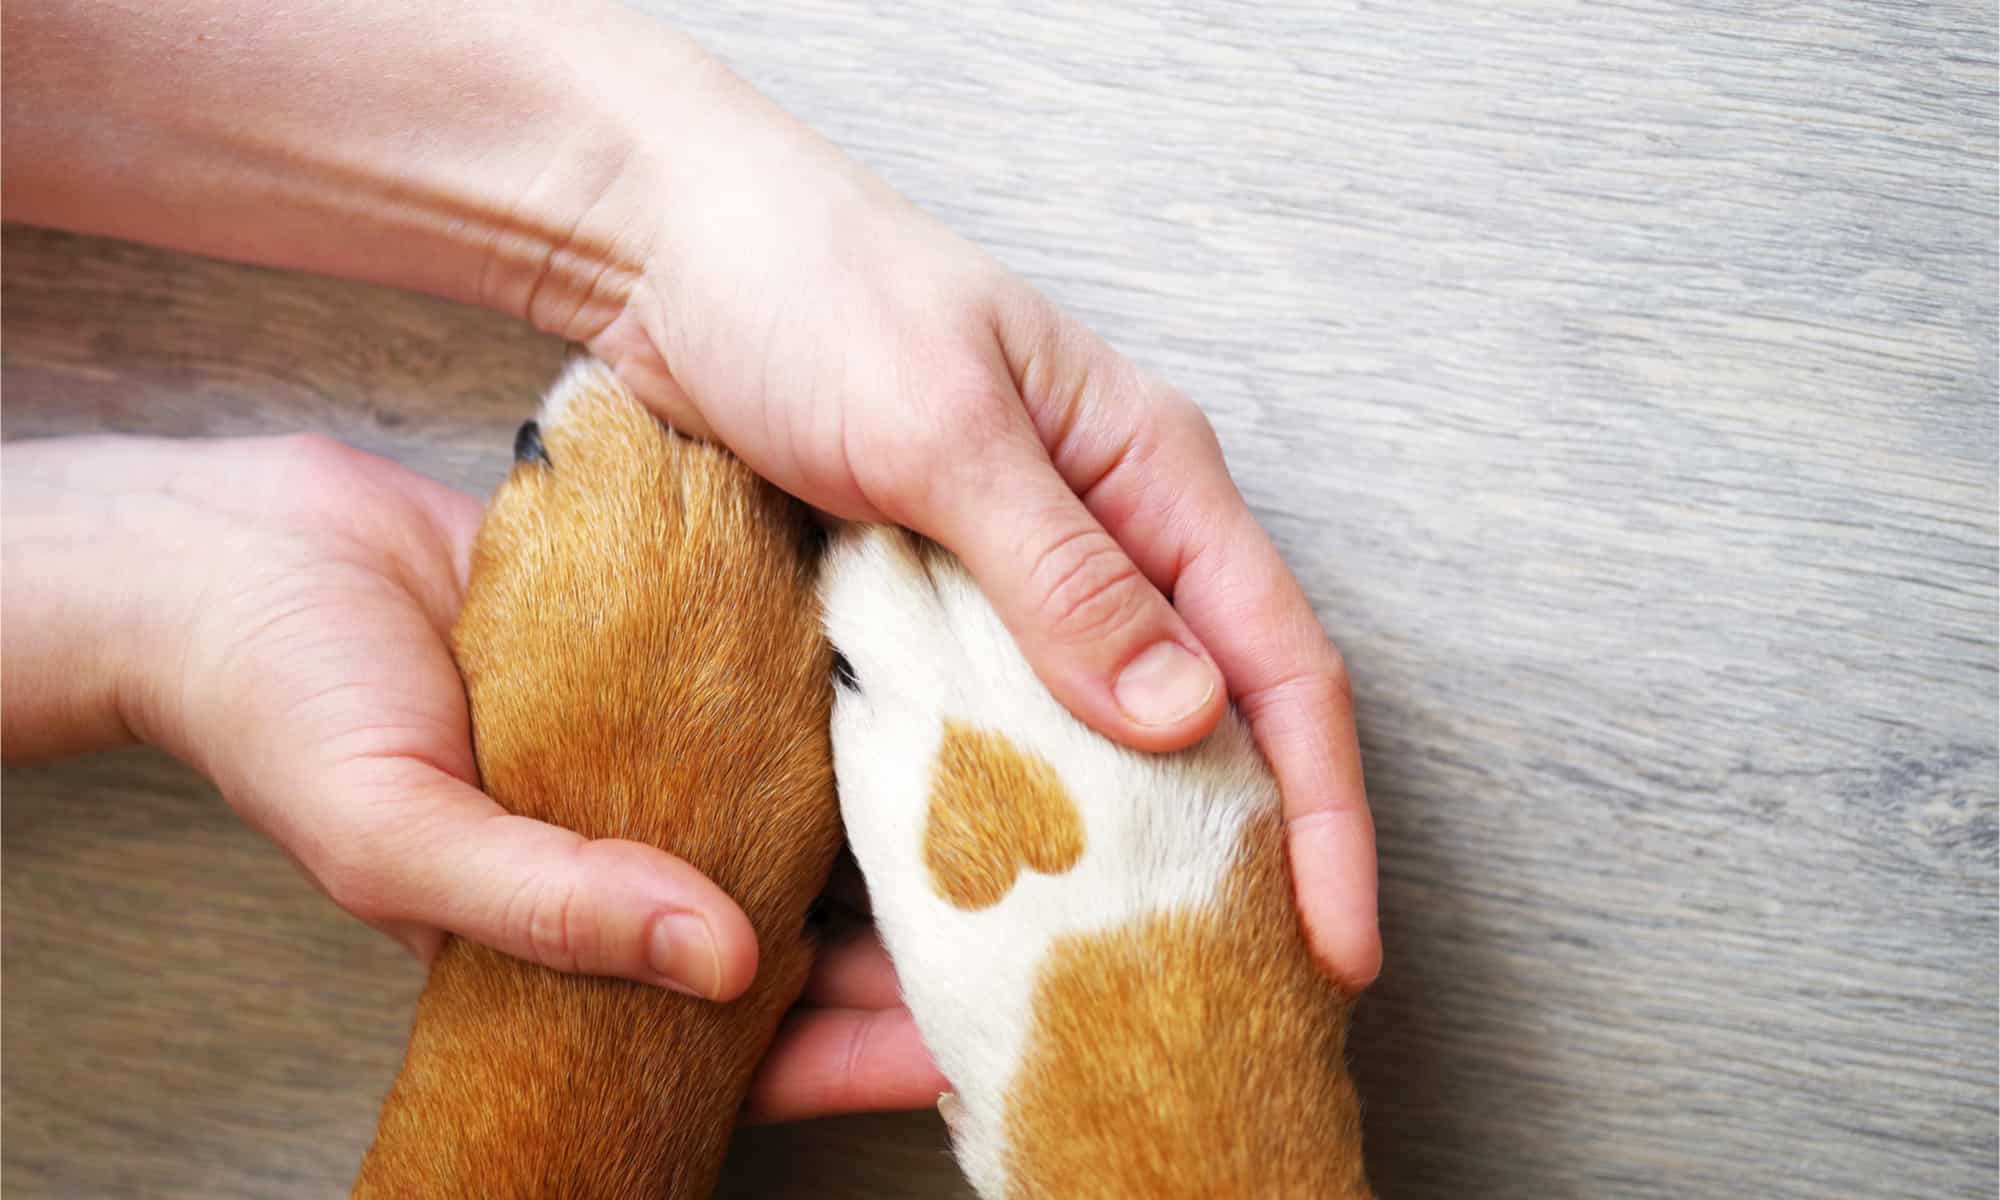 Two dog paws, one with a heart mark, being held by a person